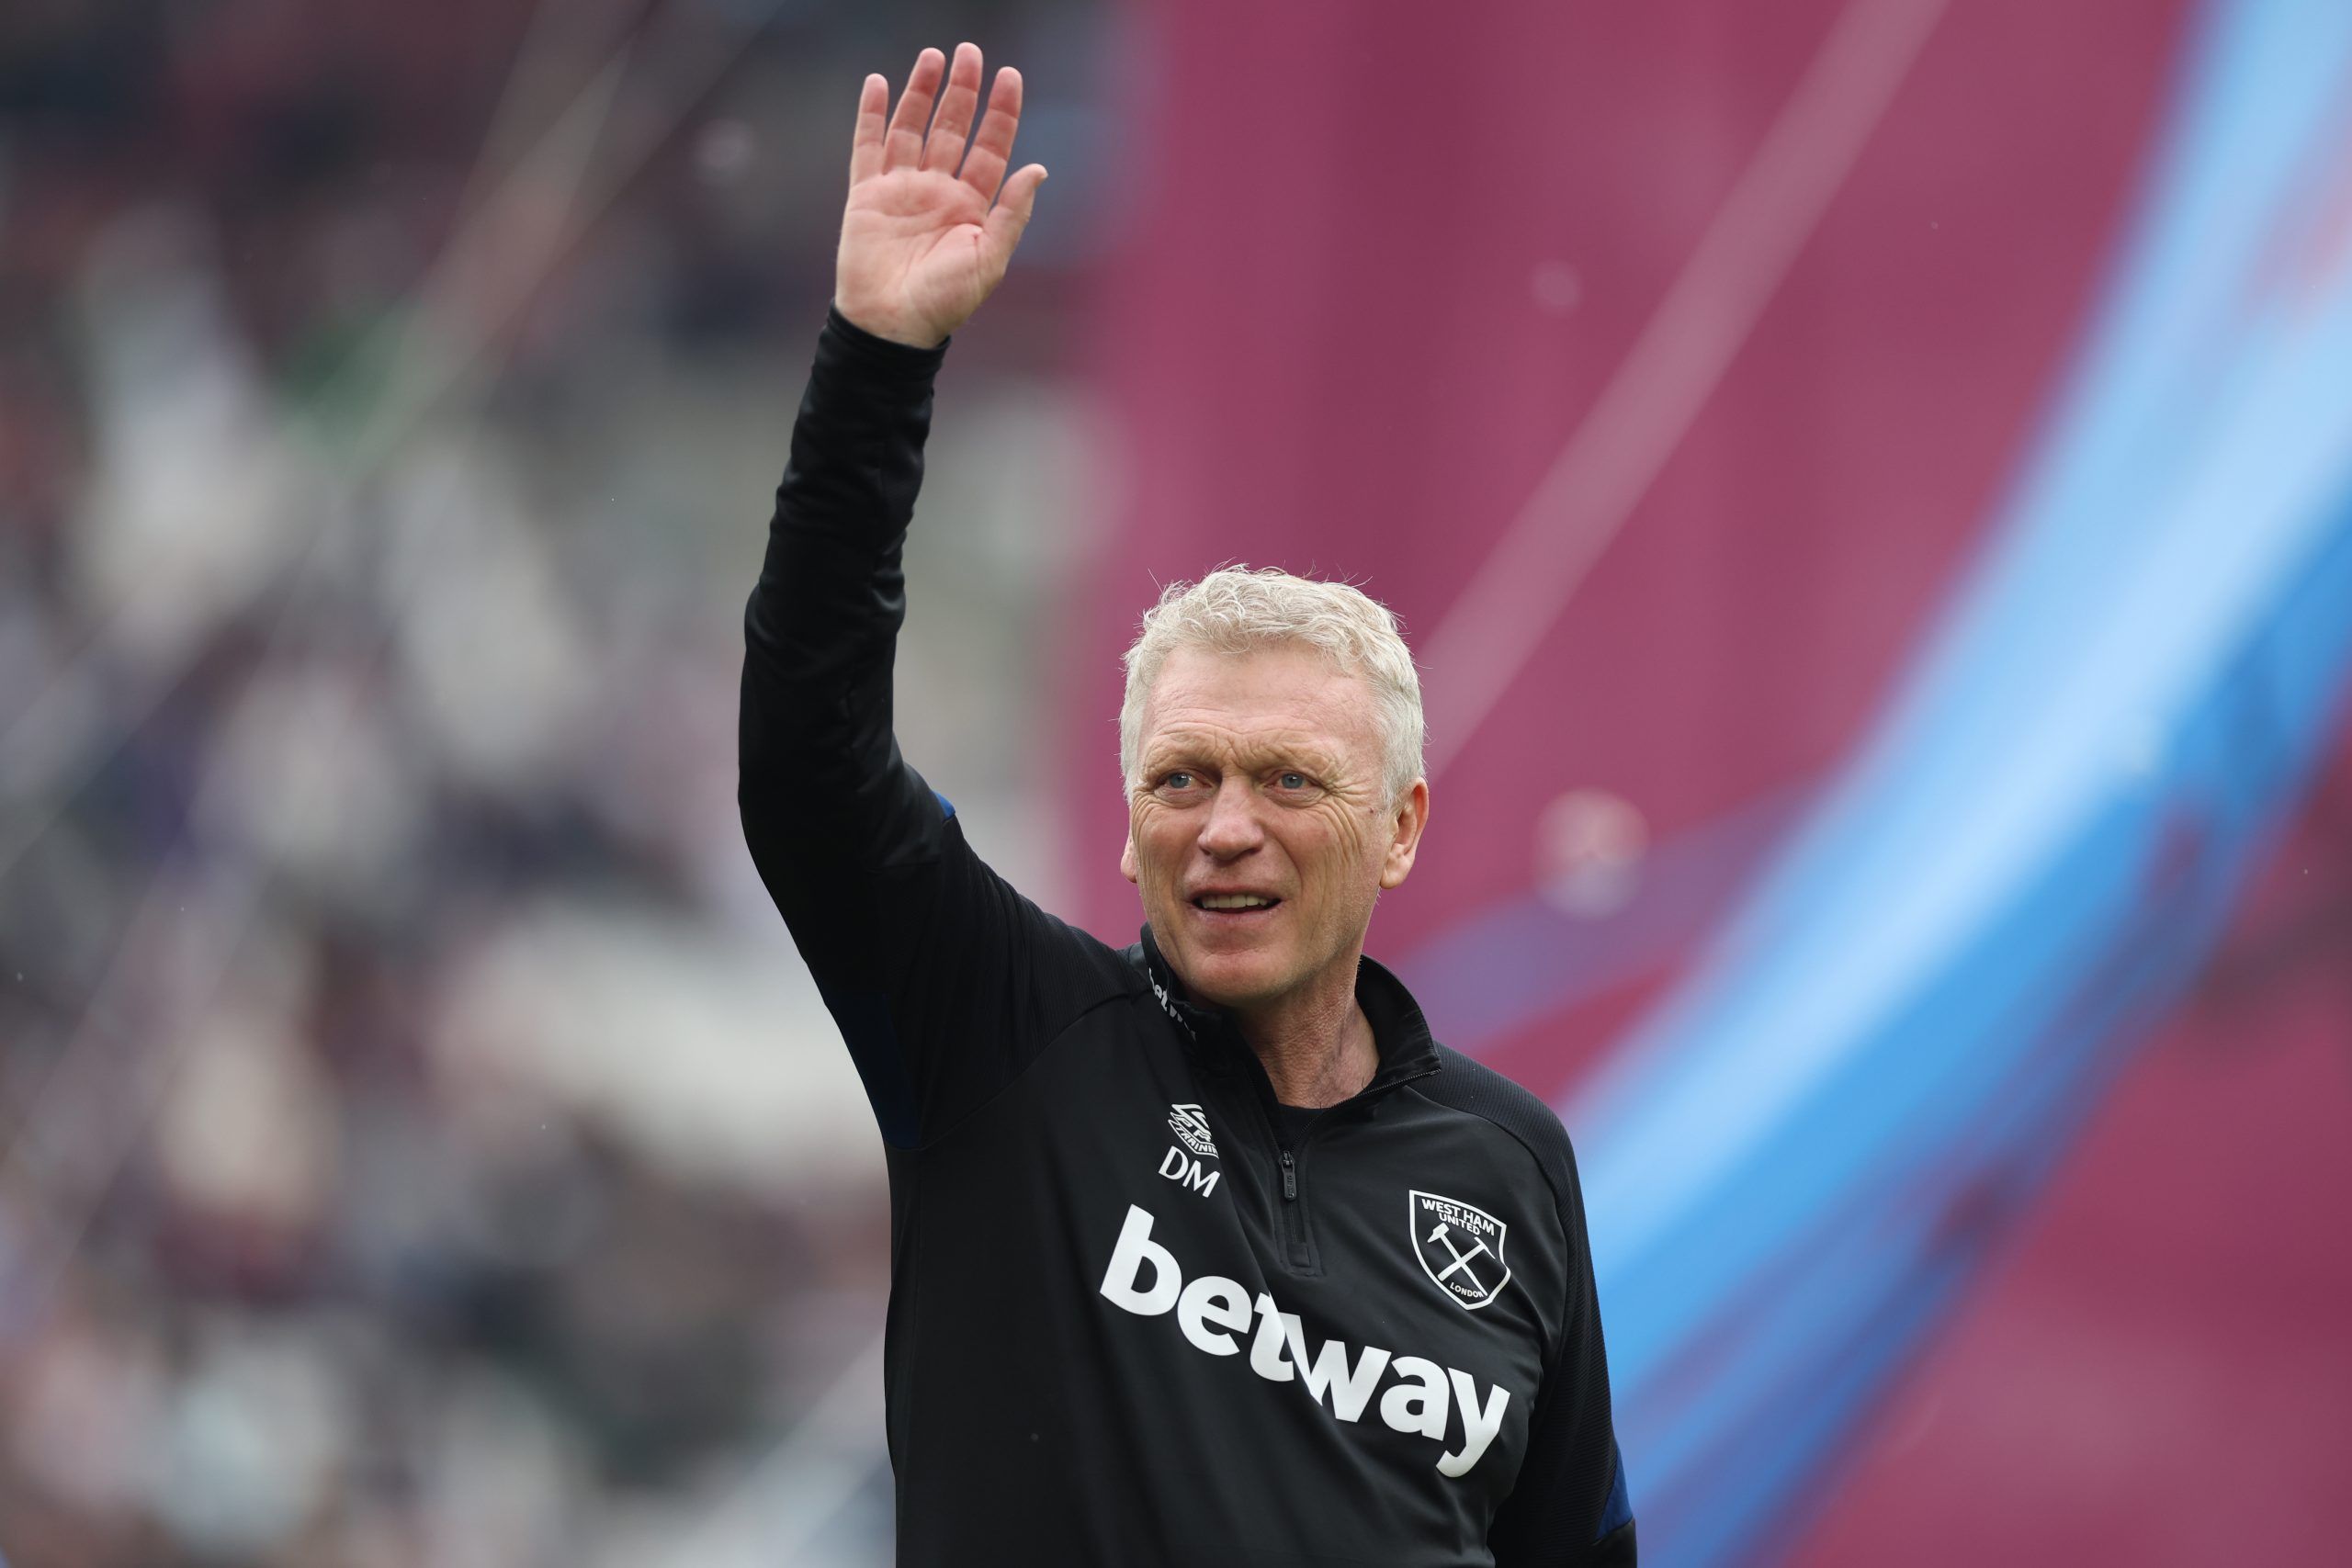 Soccer Football - Premier League - West Ham United v Manchester City - London Stadium, London, Britain - May 15, 2022 West Ham United manager David Moyes waves to fans after the match Action Images via Reuters/Matthew Childs EDITORIAL USE ONLY. No use with unauthorized audio, video, data, fixture lists, club/league logos or 'live' services. Online in-match use limited to 75 images, no video emulation. No use in betting, games or single club /league/player publications.  Please contact your accou